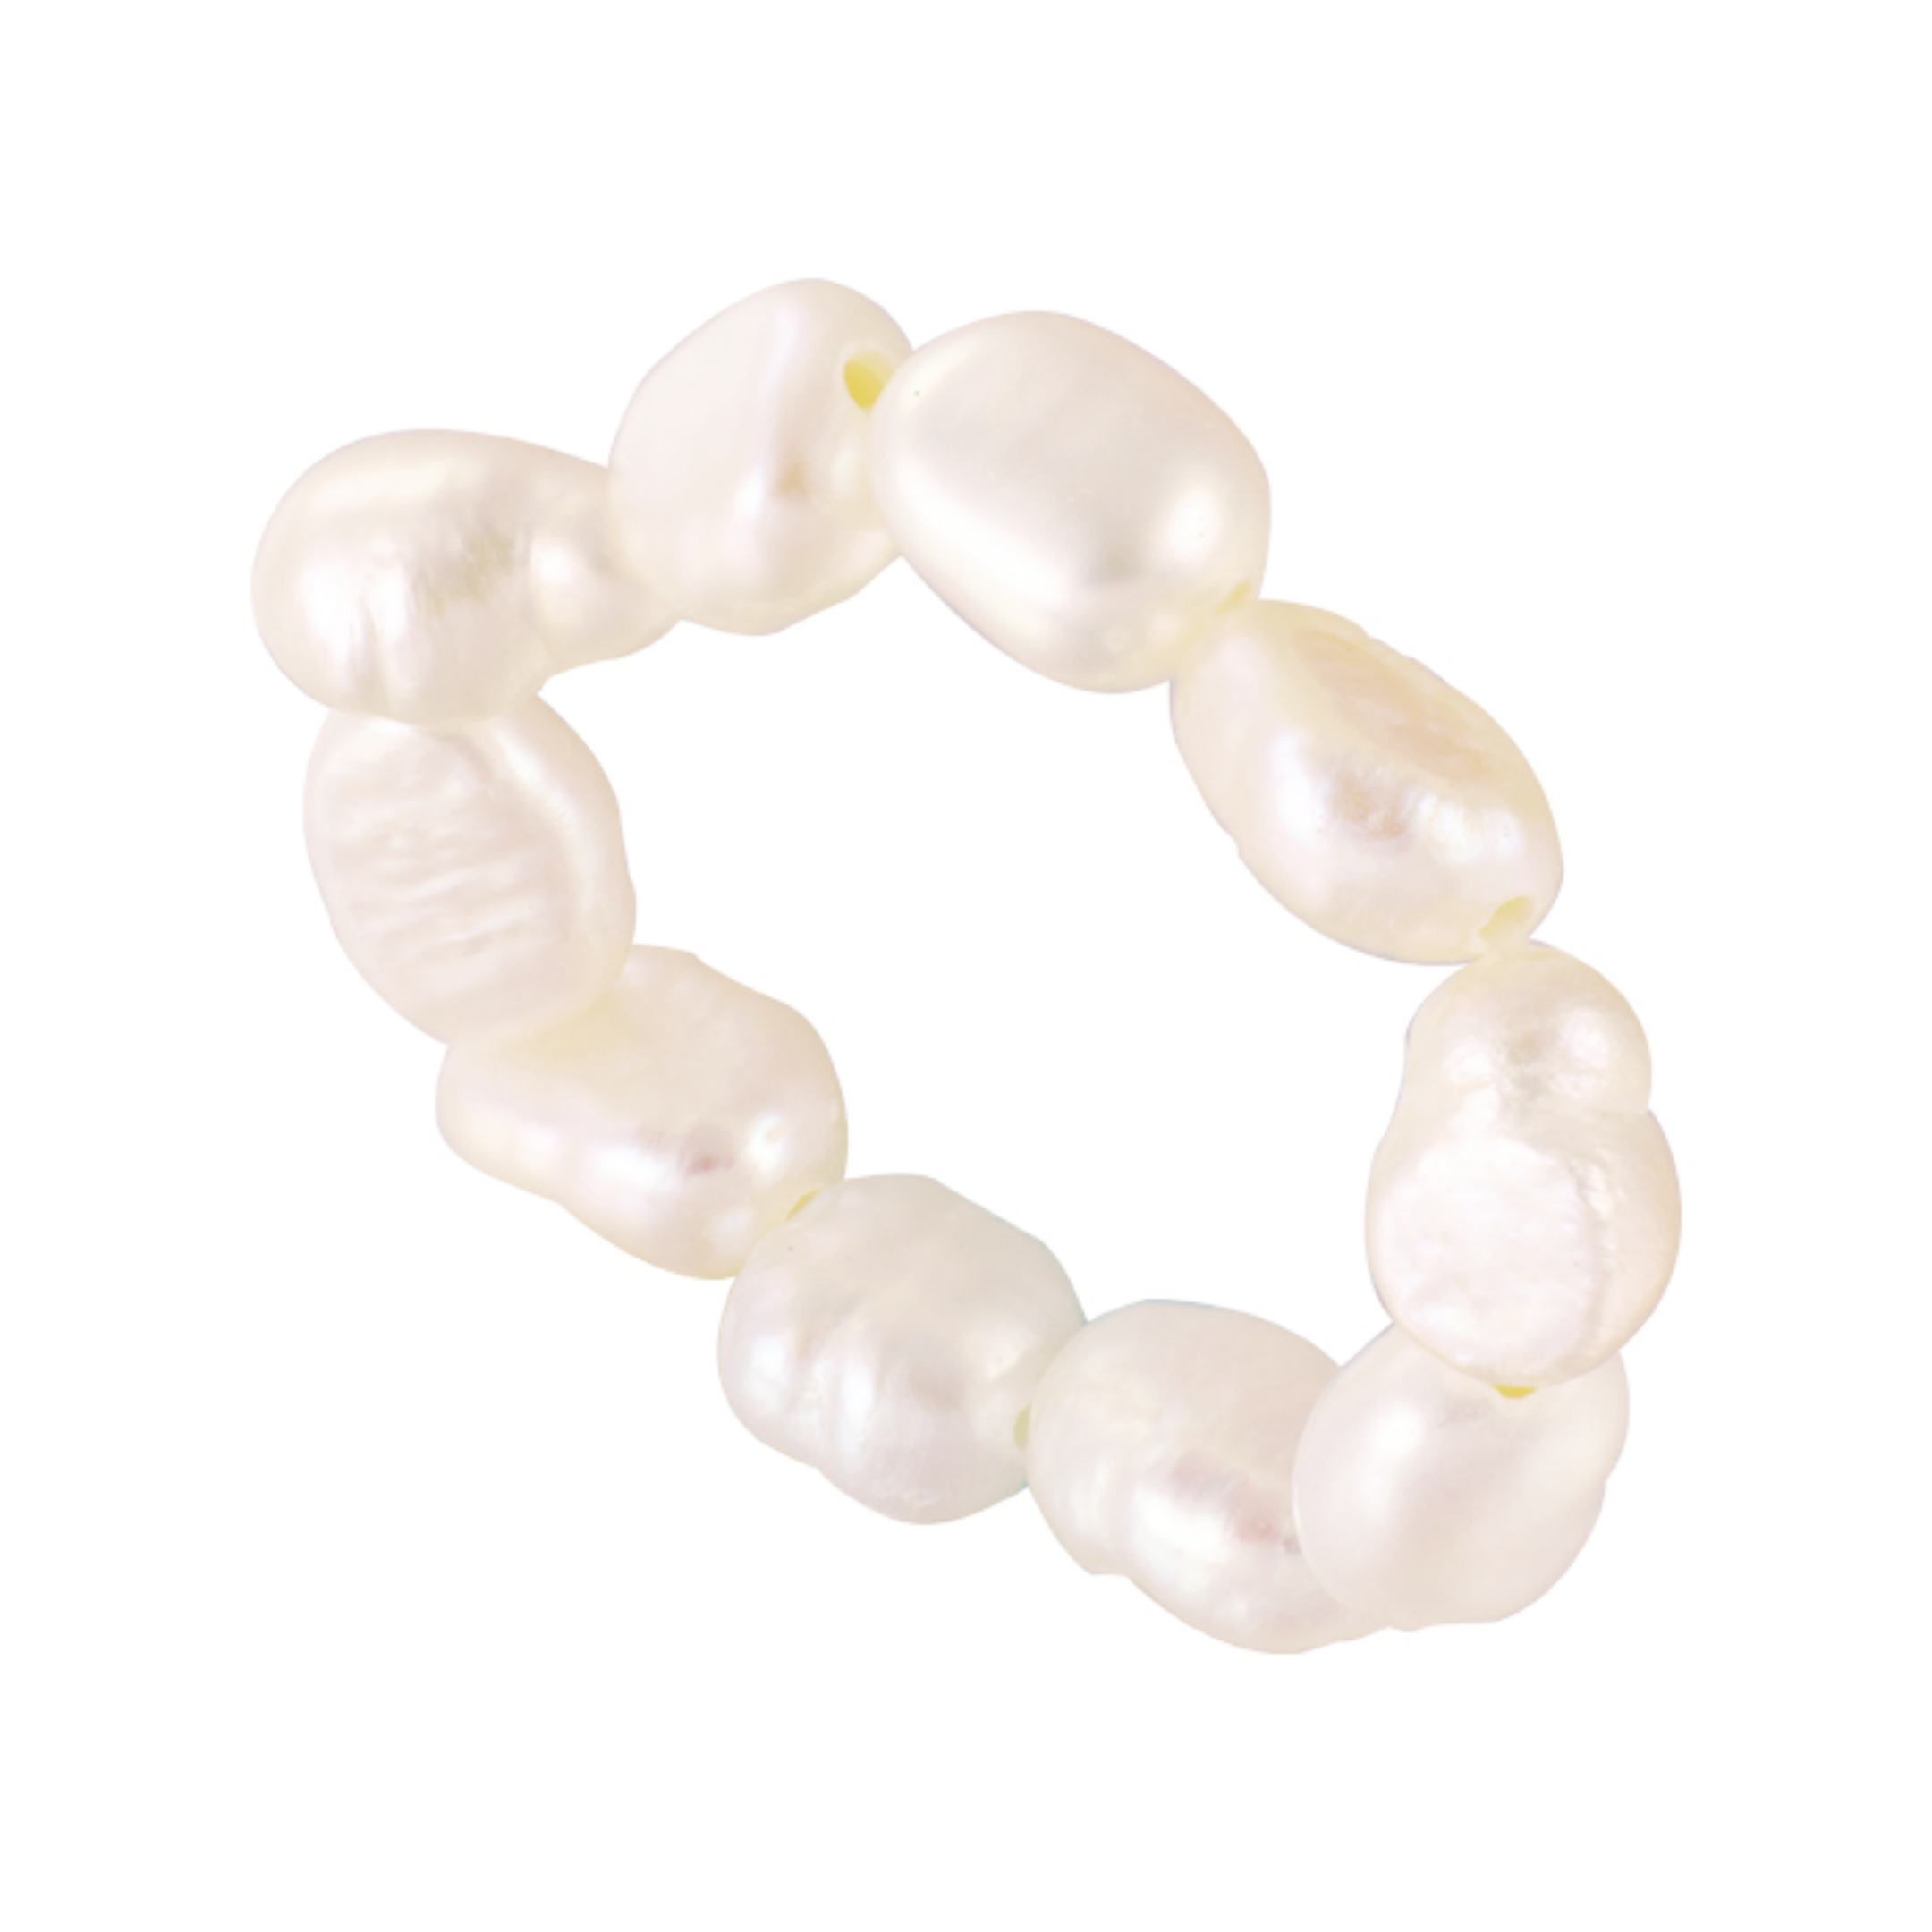 These Pearl Jewelry Pieces Are So Classic, Yet So Stylish